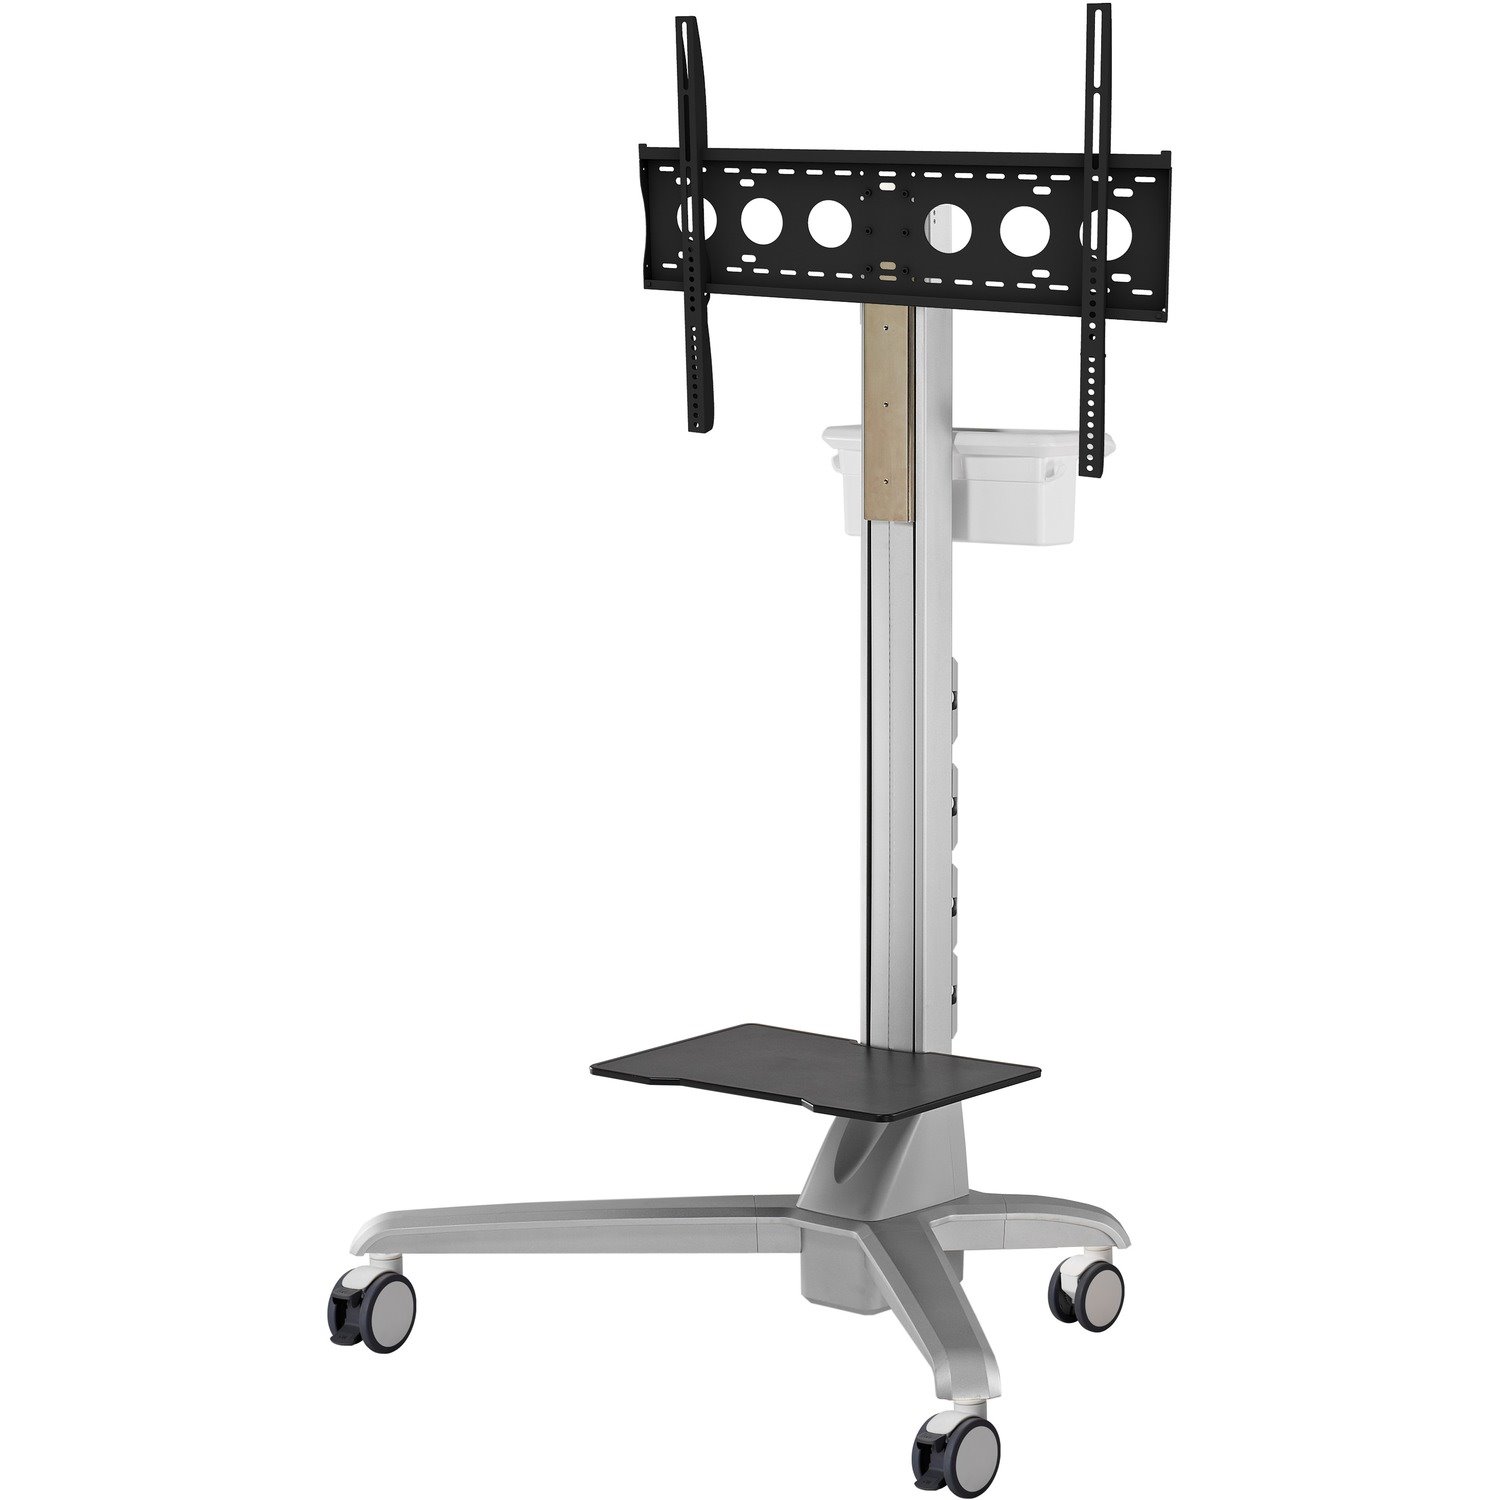 Amer Mobile Media Conference Computer / TV Display Cart with Motorized Lift